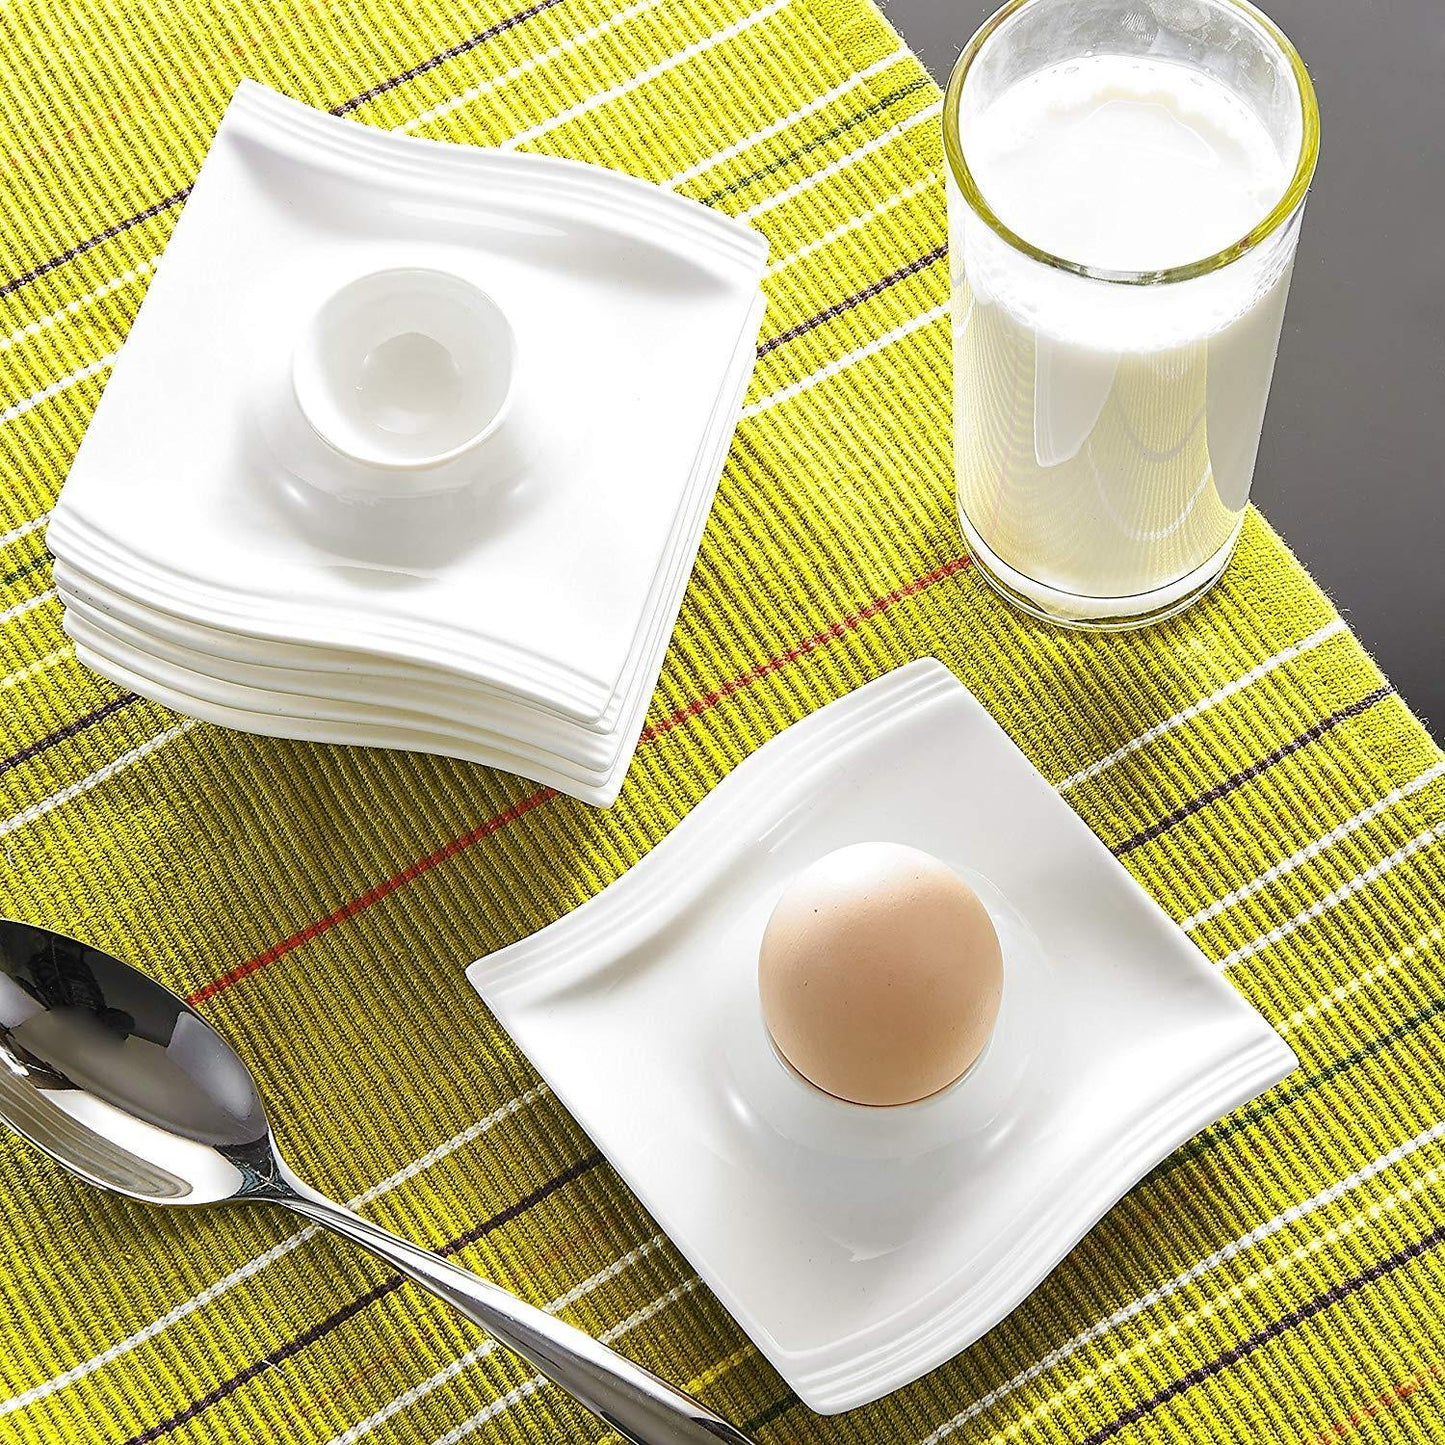 Flora 6-Piece Series White Porcelain Egg Stand Holder - Nordic Side - 115, 25, Breakfast, cm, Cups, Egg, Flora, Holder, Kitchen, Malacasa, Piece, Plates, Porcelain, Series, Stand, Tools, Whit